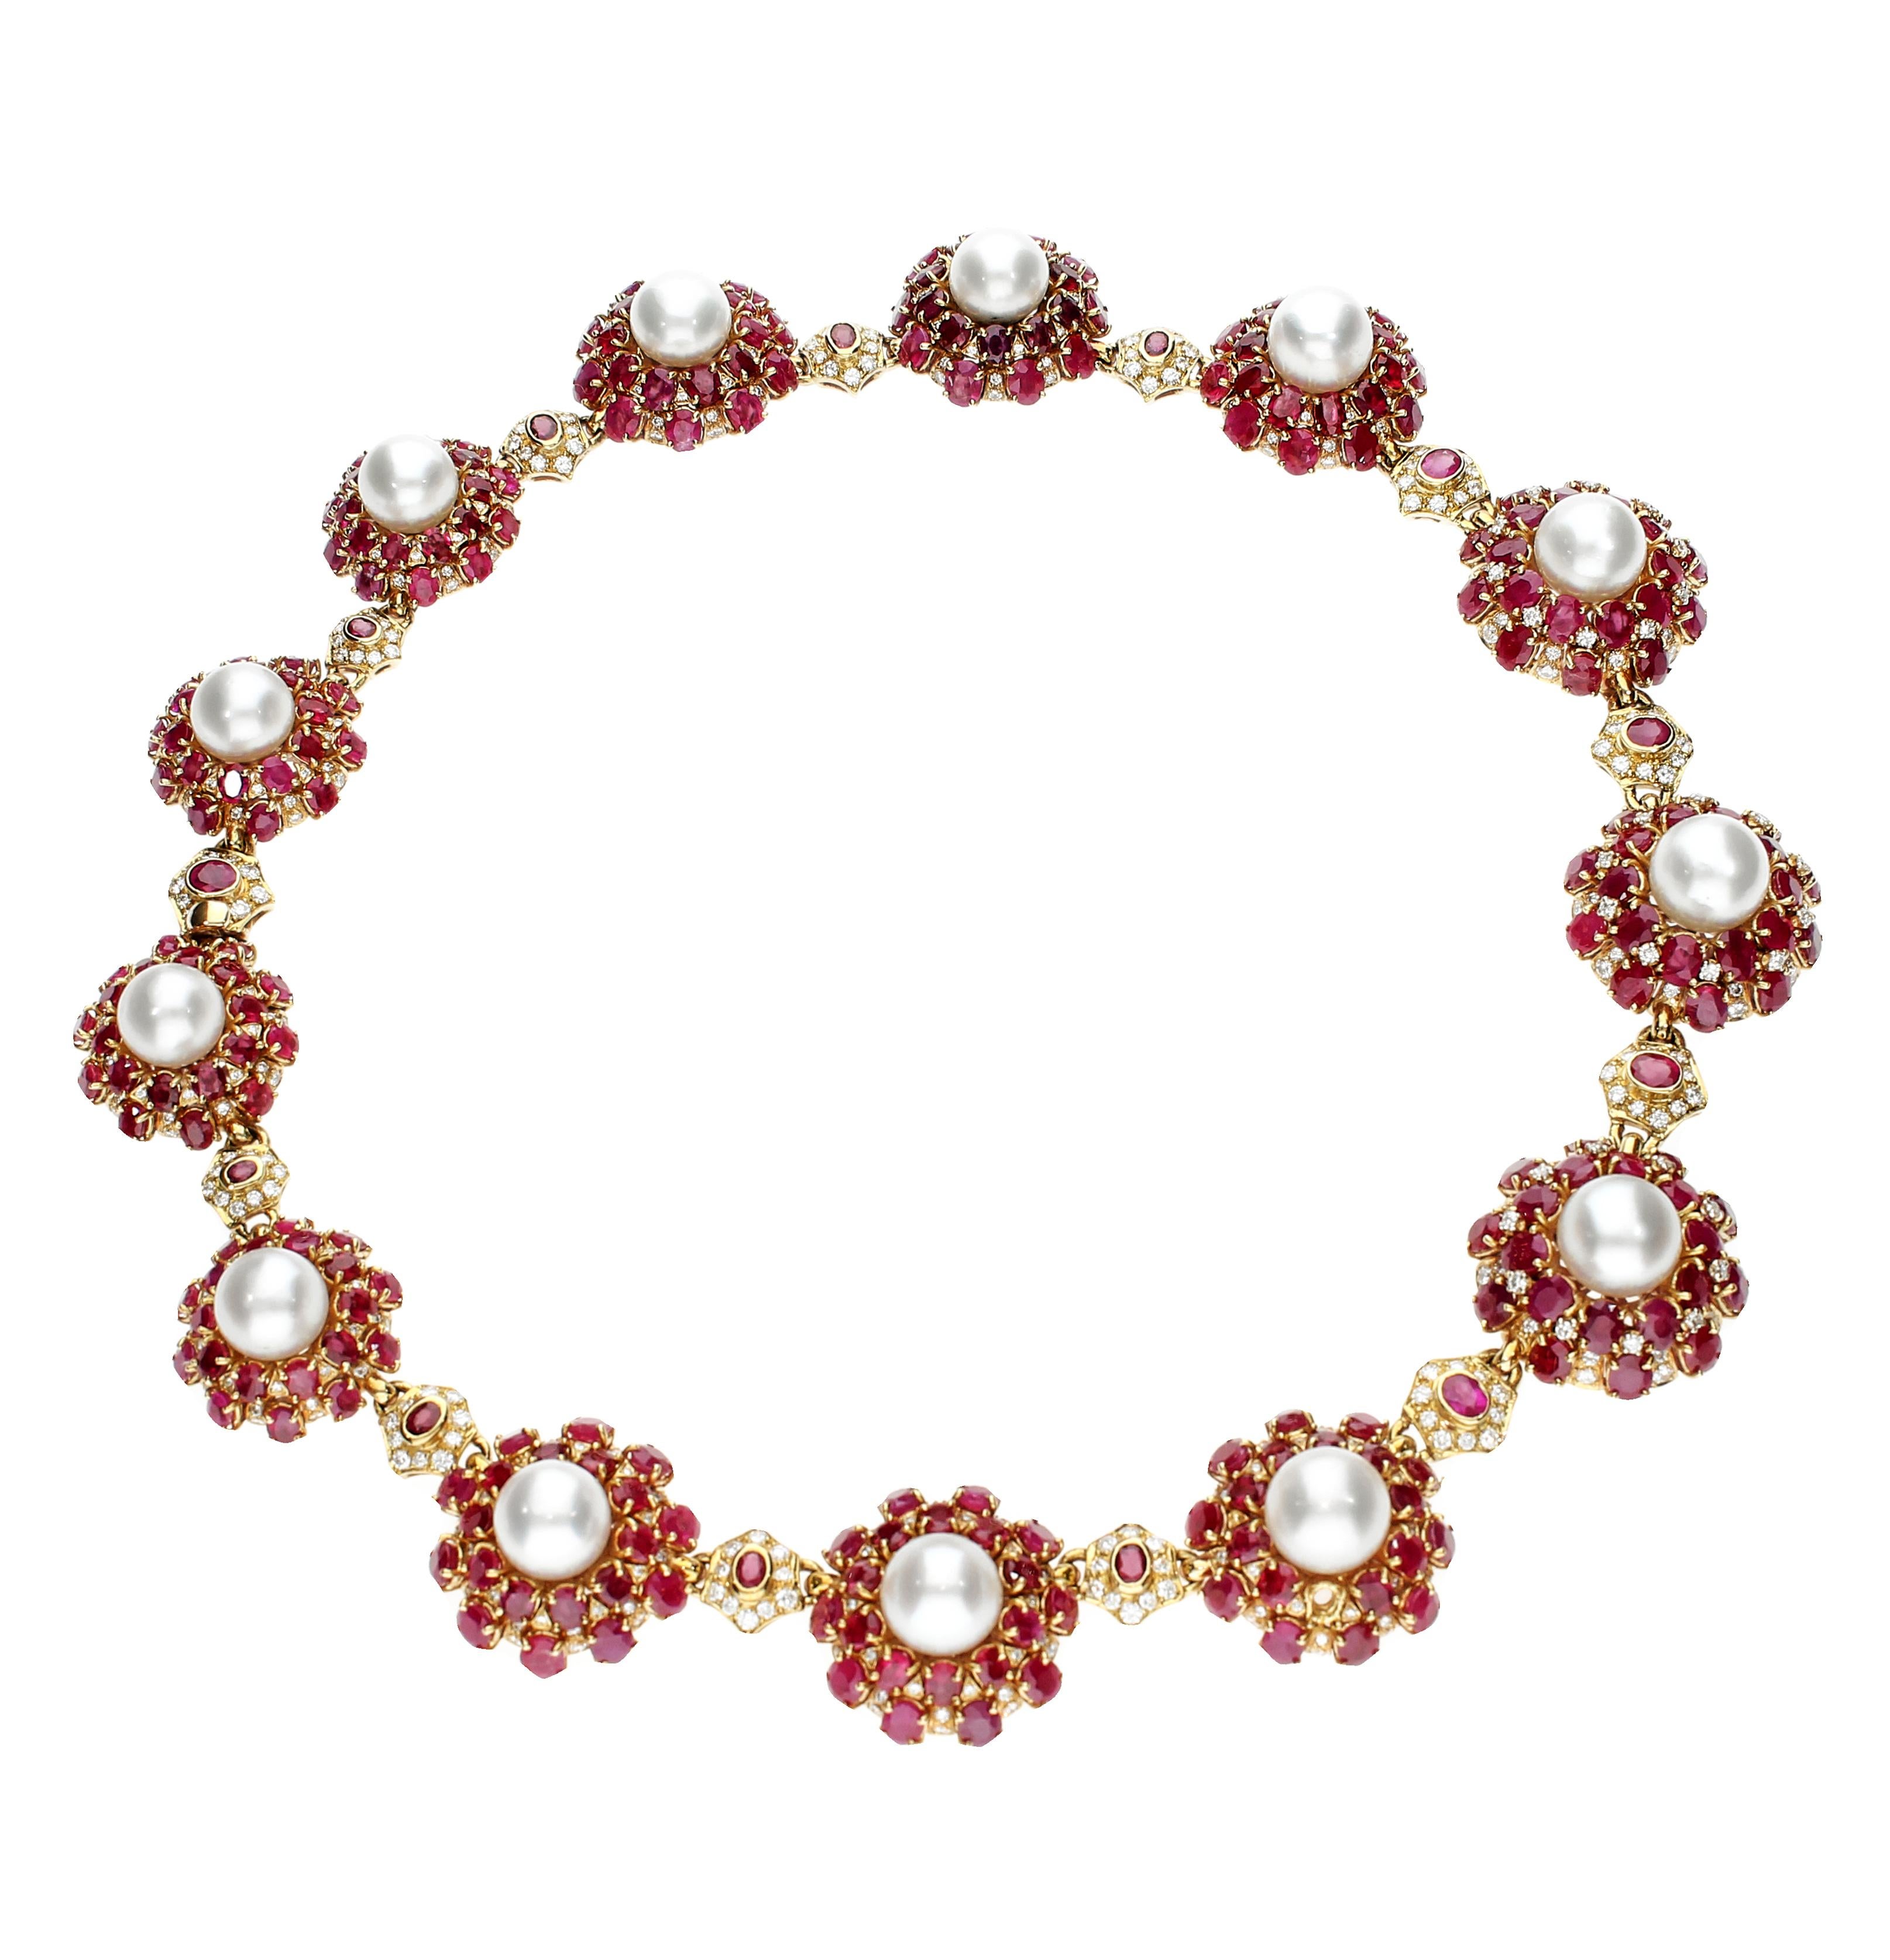 Parure with Rubies, Pearls and Diamonds in 18 Karat Yellow Gold 1